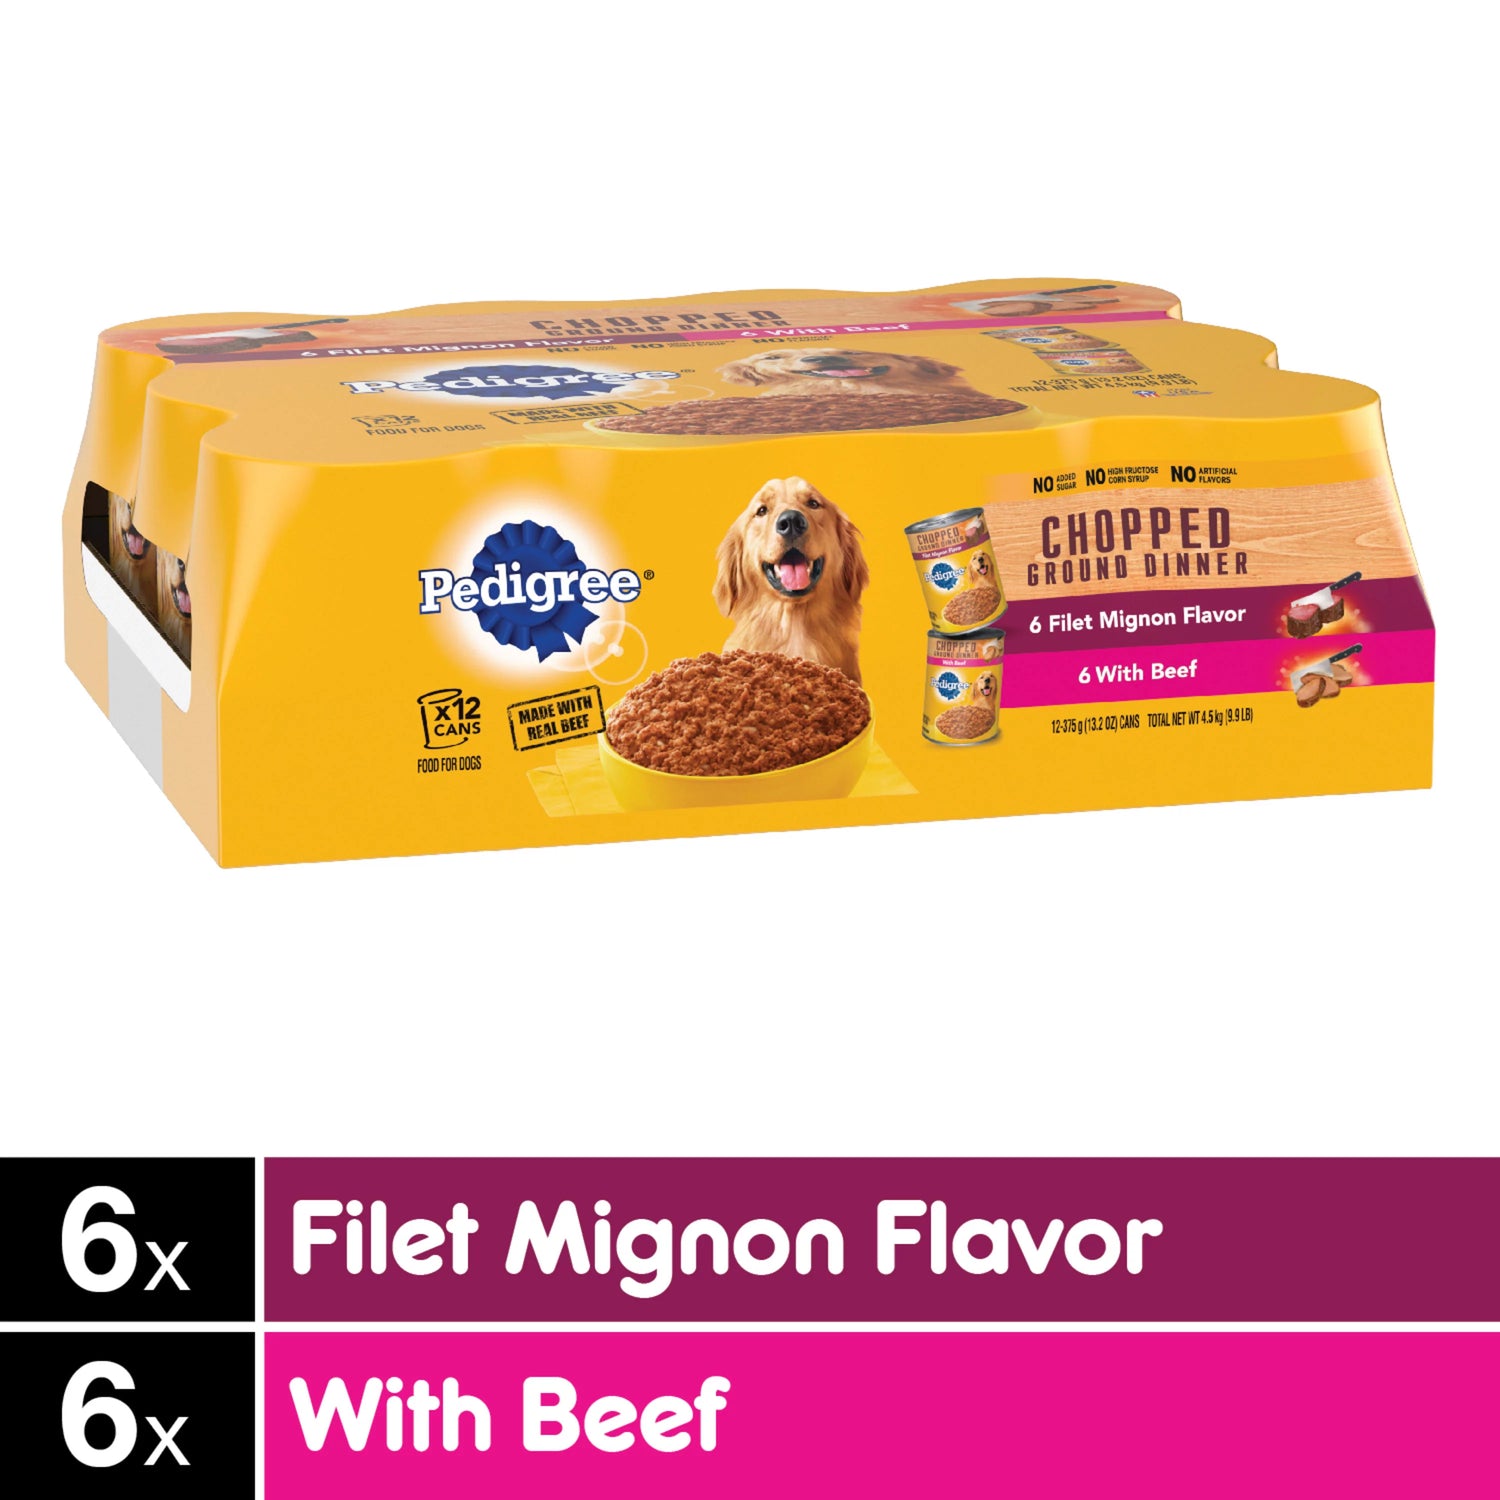 PEDIGREE CHOPPED GROUND DINNER Adult Canned Soft Wet Dog Food, Variety Pack, Filet Mignon Flavor and with Beef, (12) 13.2 Oz. Cans